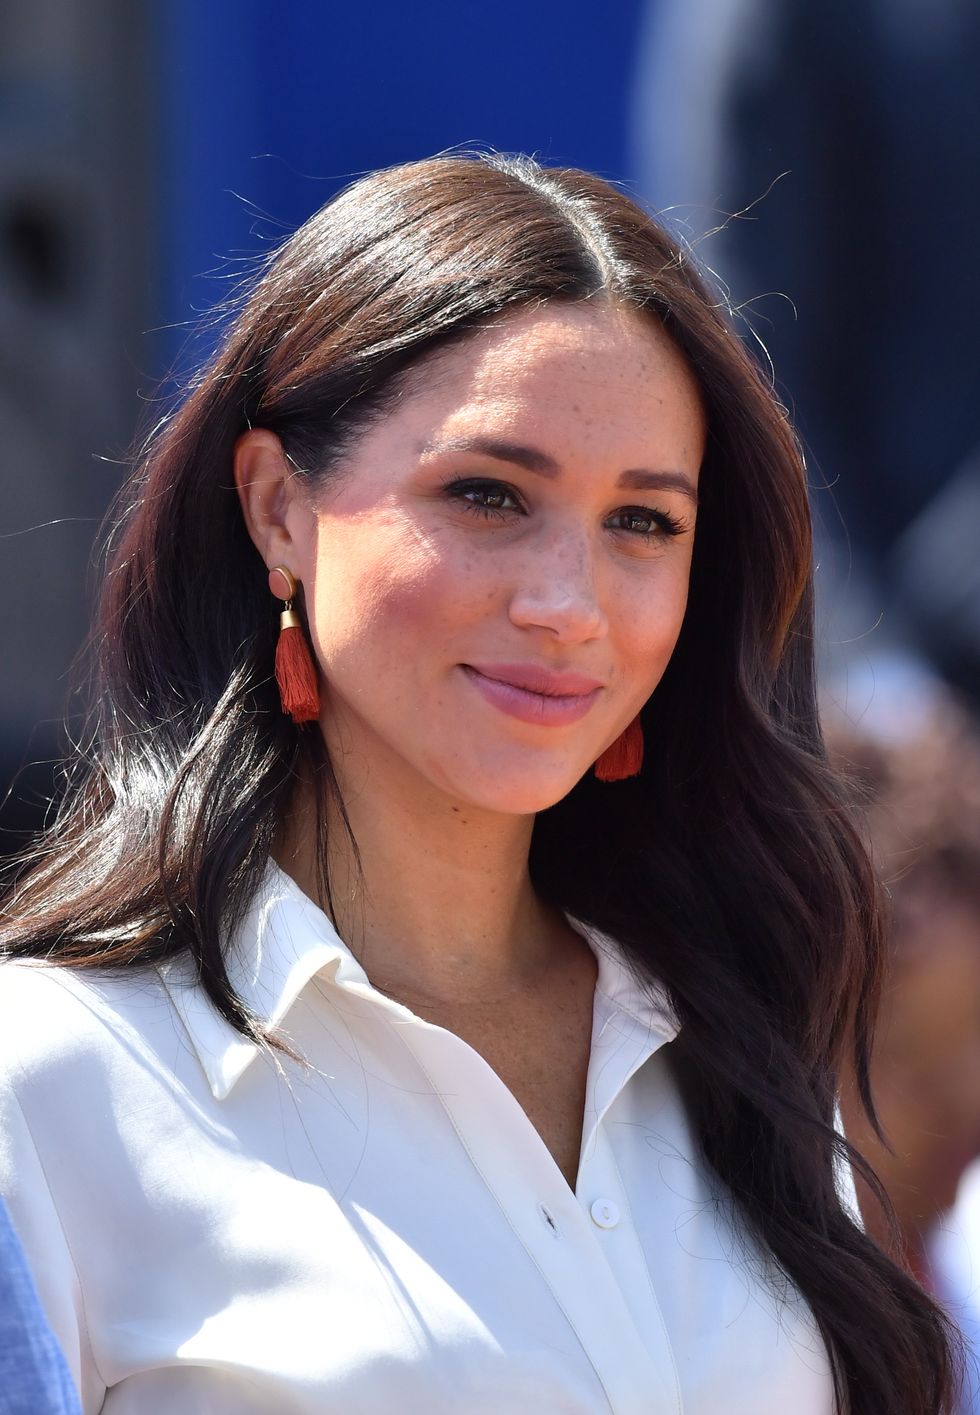 The Duchess of Sussex said she aimed to show 'another side of masculinity' in The Bench